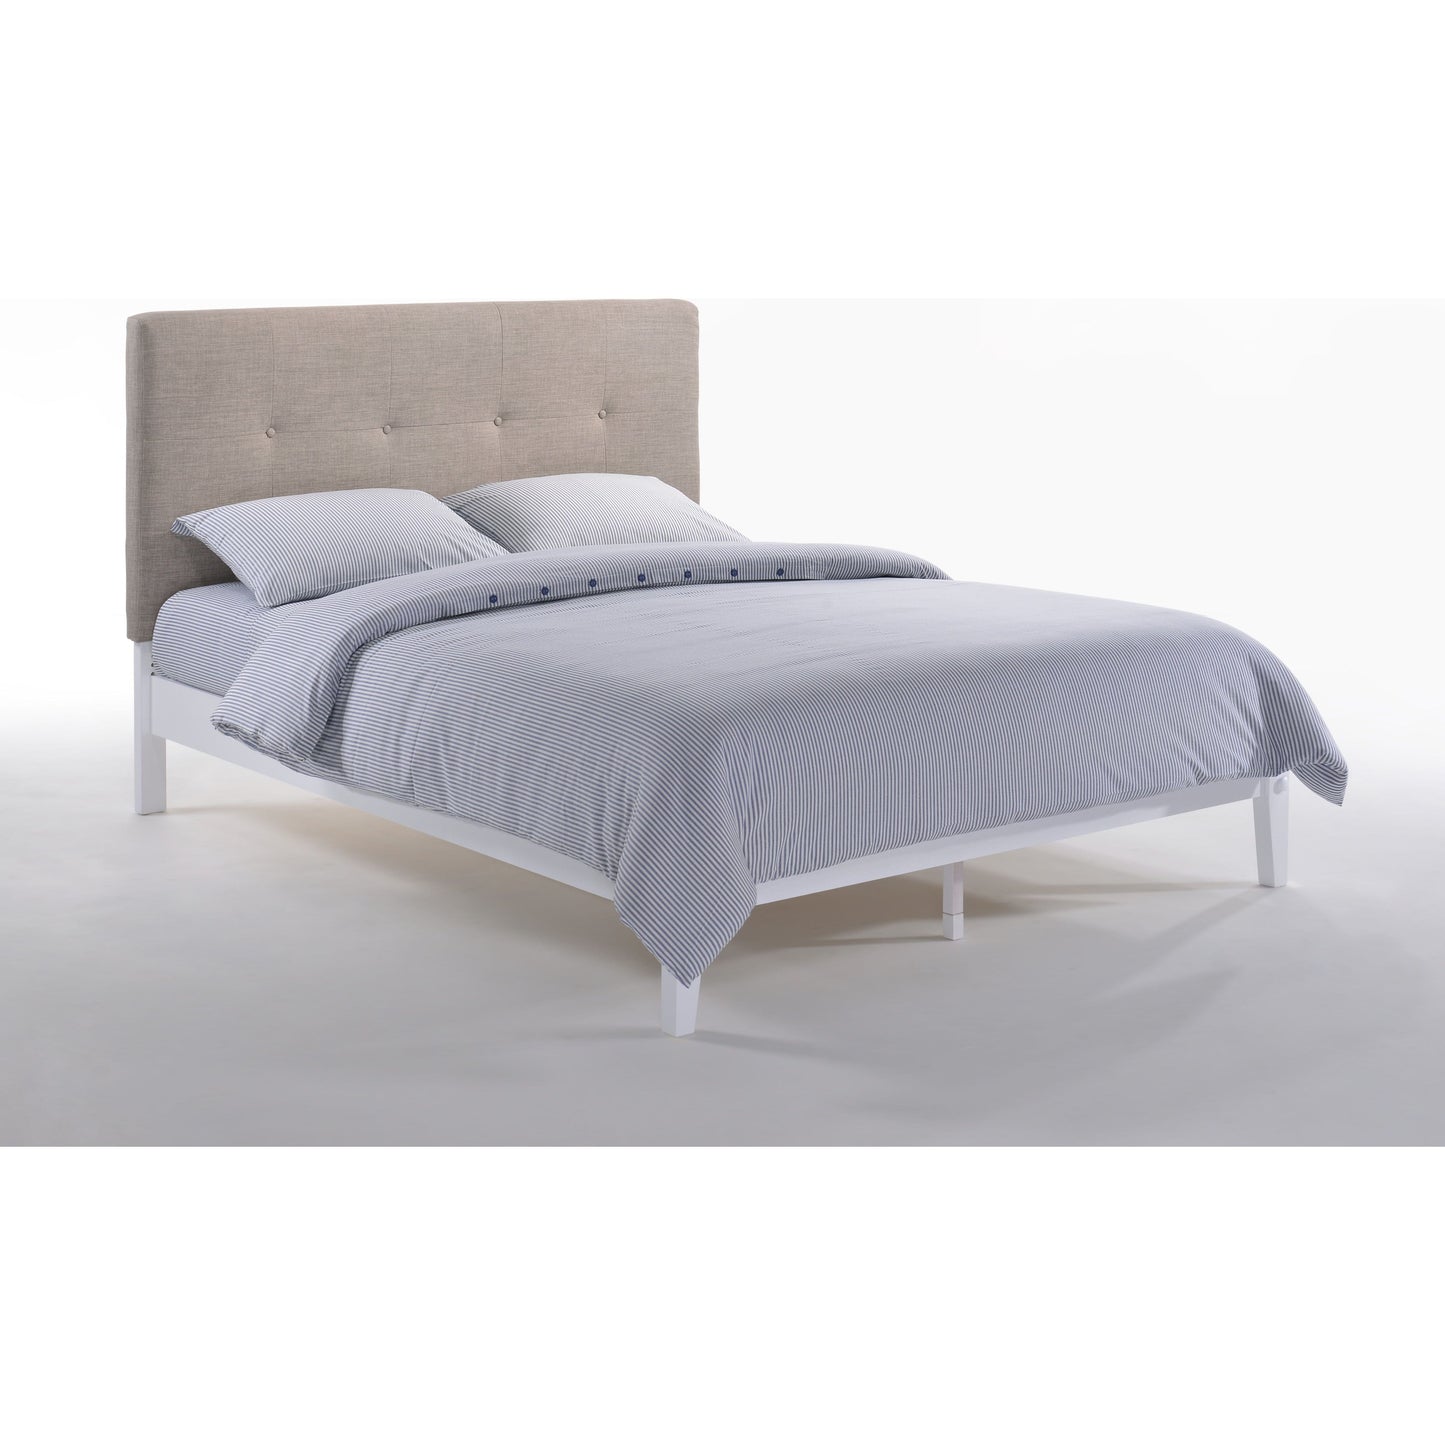 Night and Day Paprika Full Bed in Teal with White Finish Frame (K Series) Grey